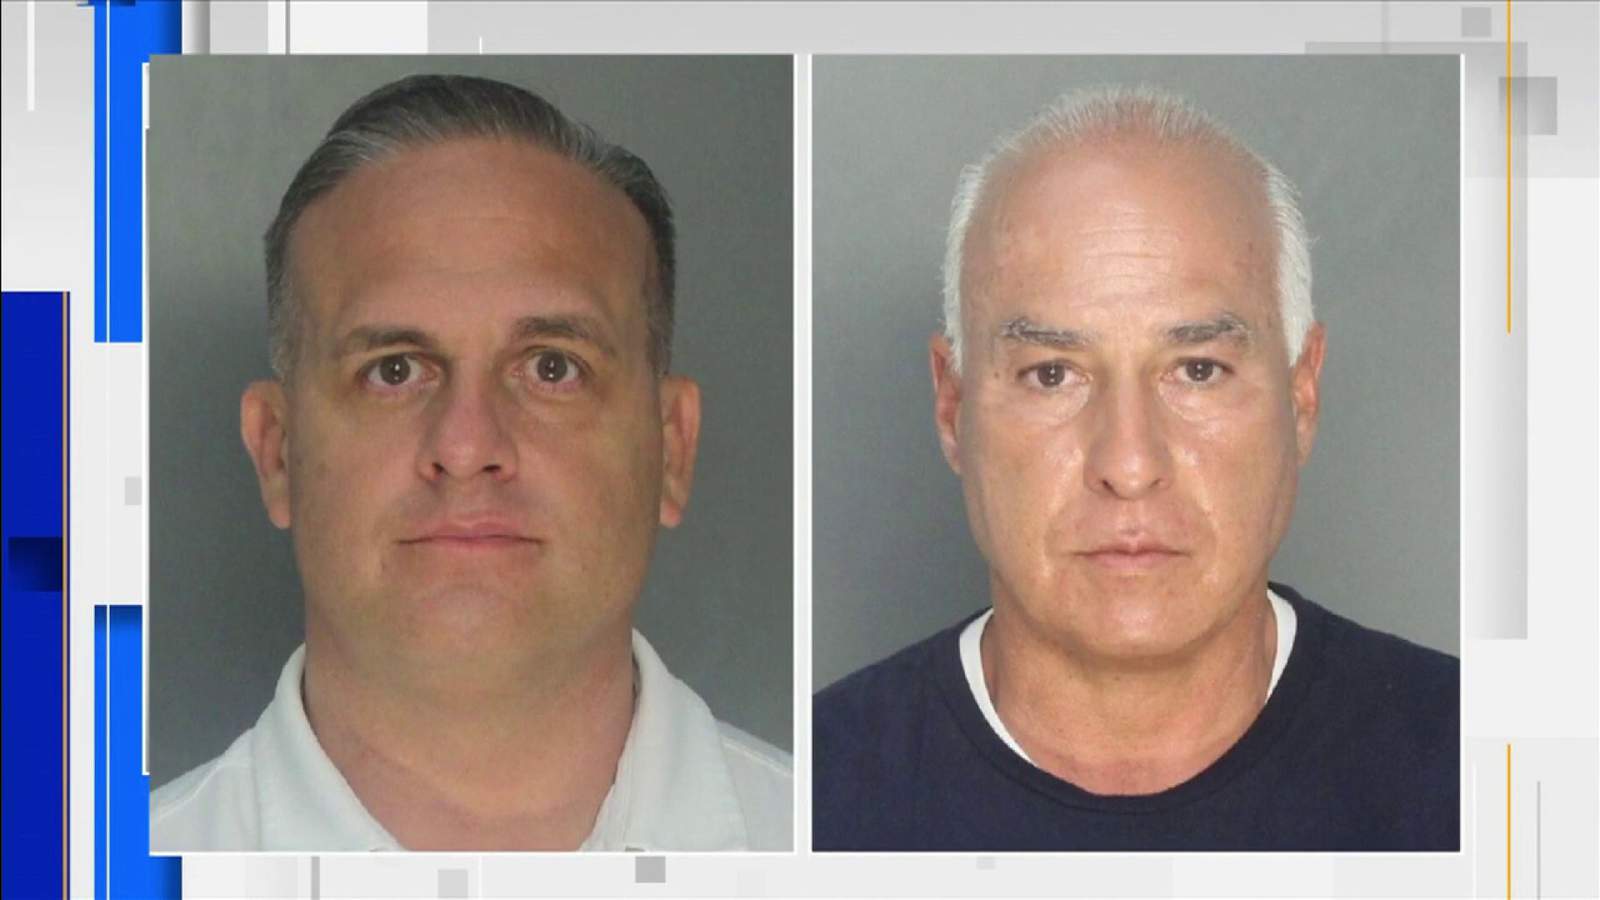 Artiles and shill candidate plead not guilty; hints to defense strategy emerge